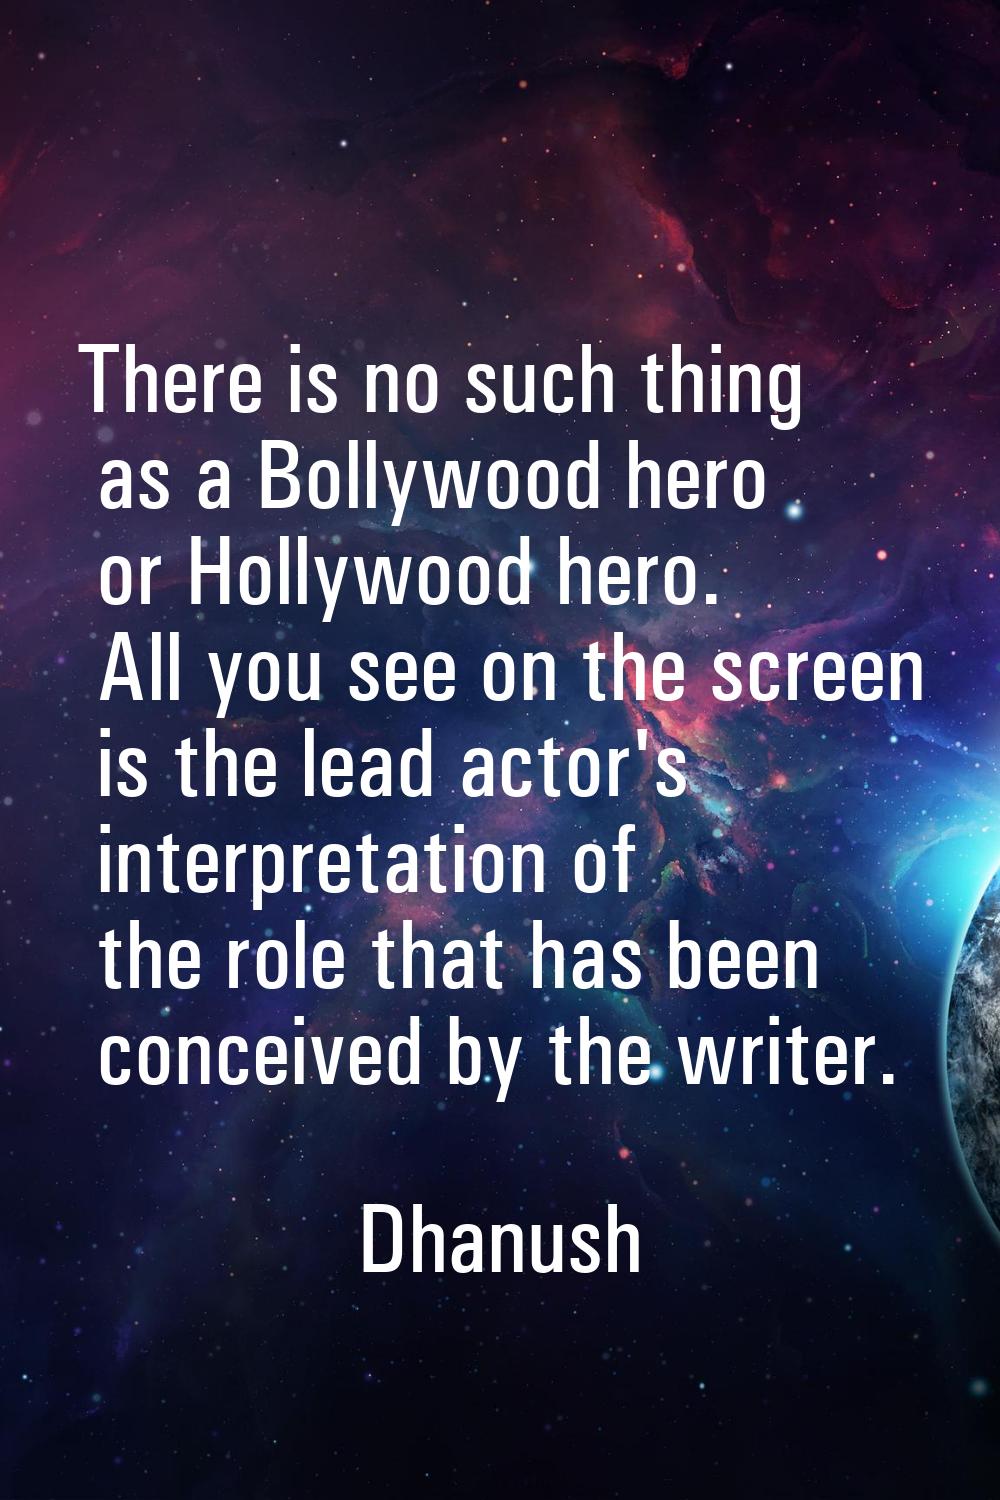 There is no such thing as a Bollywood hero or Hollywood hero. All you see on the screen is the lead